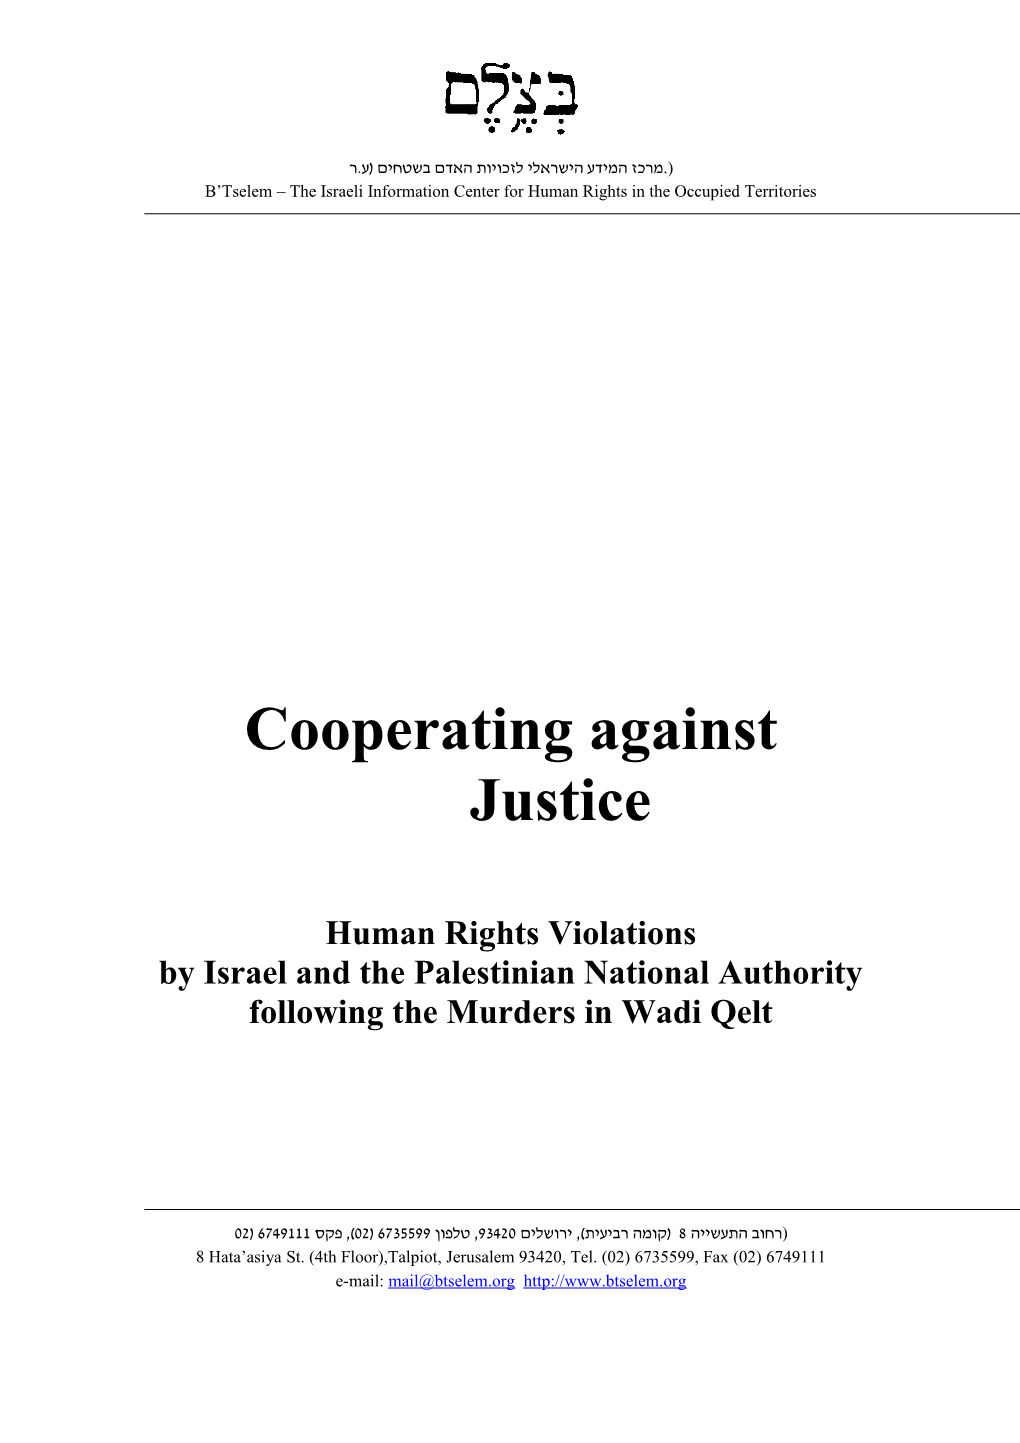 B'tselem - Cooperating Against Justice: Human Rights Violations by Israel and the Palestinian